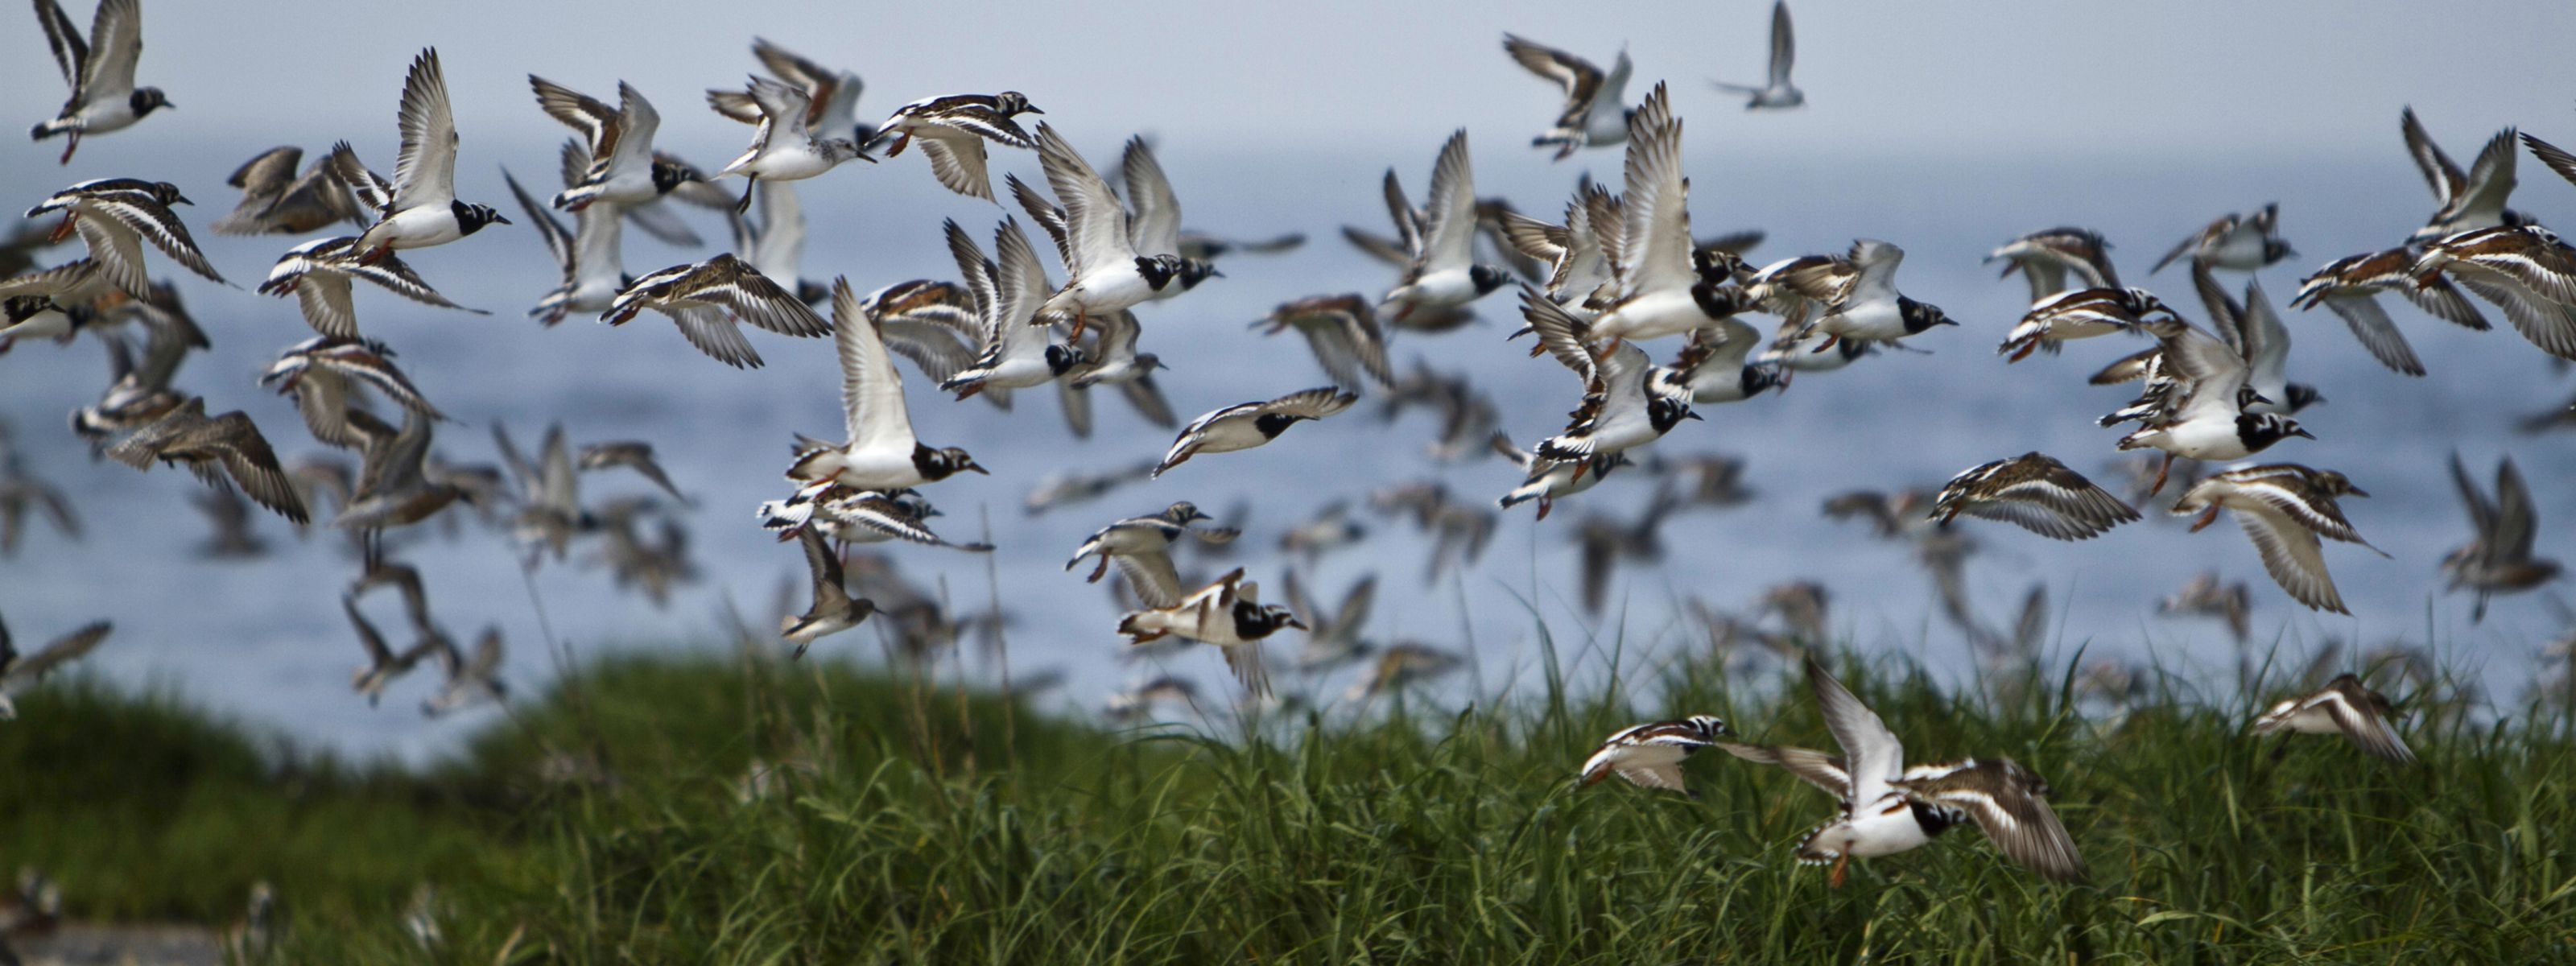 Several white shore birds fly in a large group over grassy dunes.